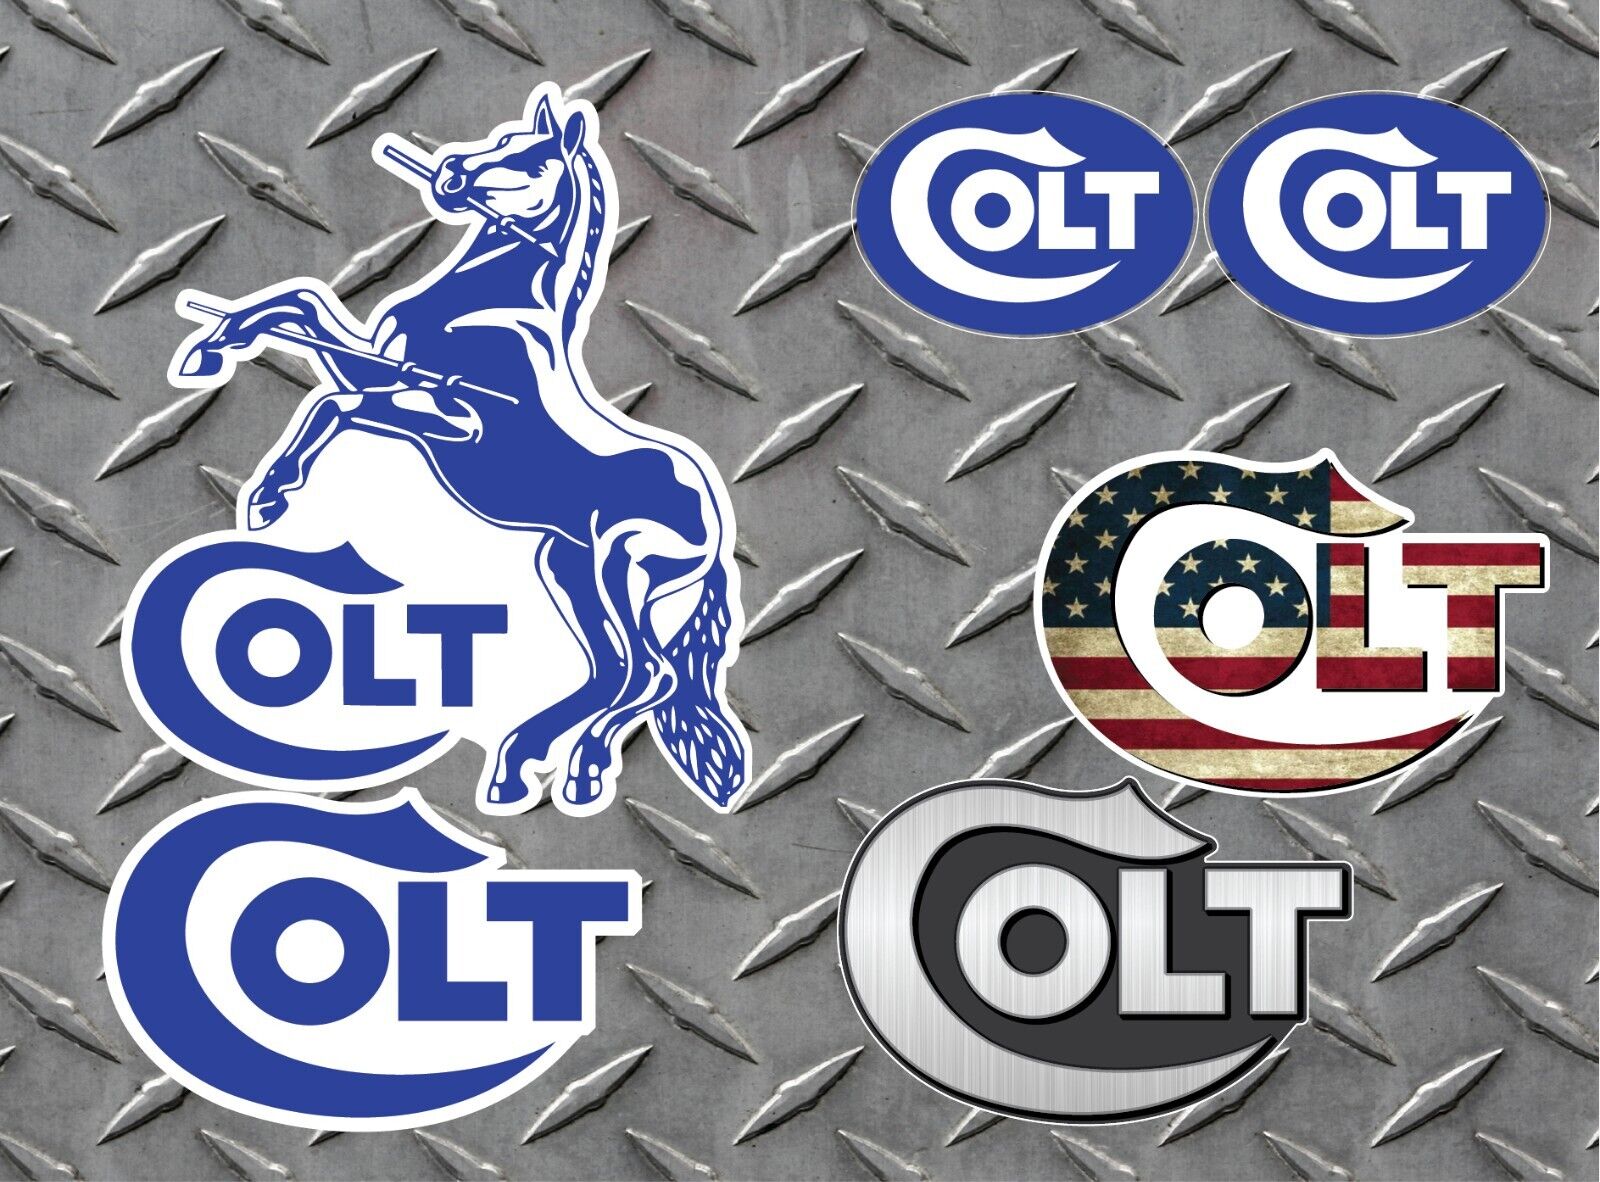 6 Colt Decals - Vinyl Decals Hunting Firearms Indoor or Outdoor High Quality